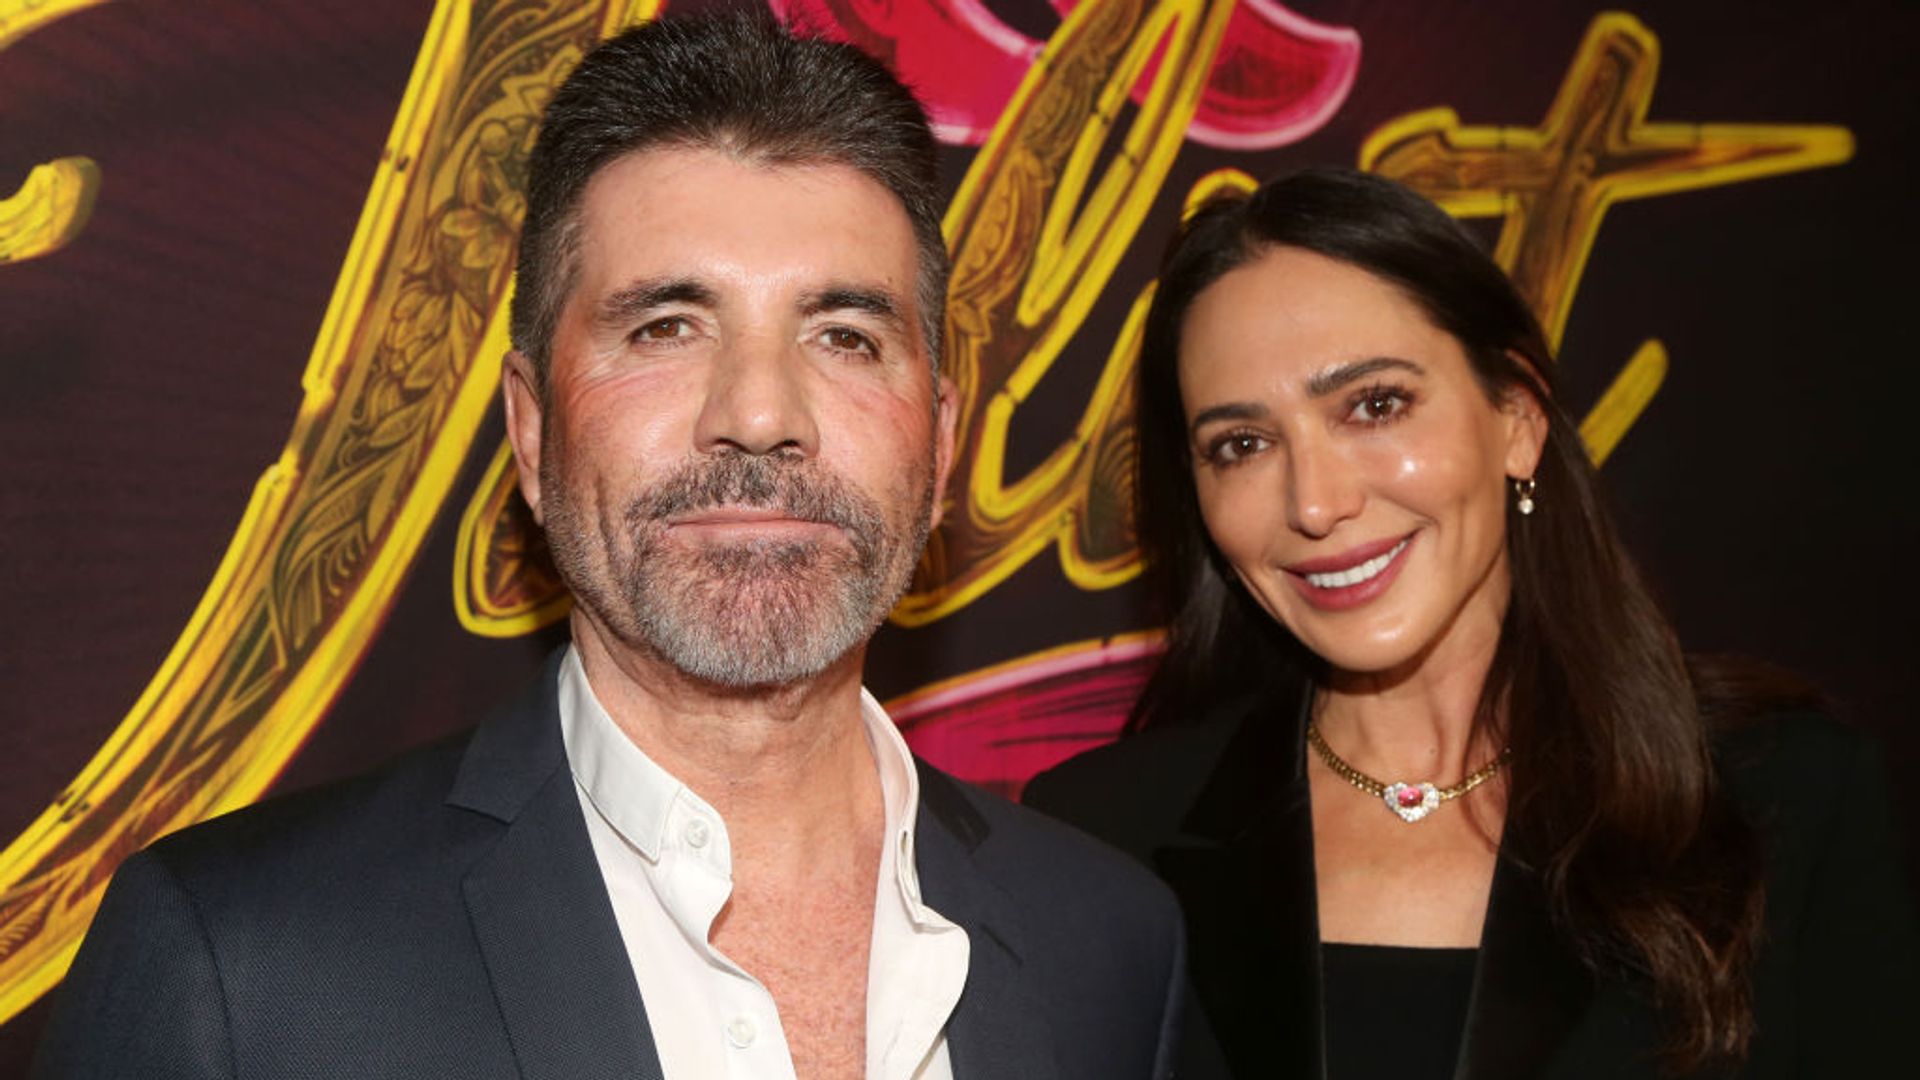 Simon Cowell and Lauren Silverman pose at the opening night of the new musical "& Juliet" on Broadway at The Stephen Sondheim Theatre on November 17, 2022